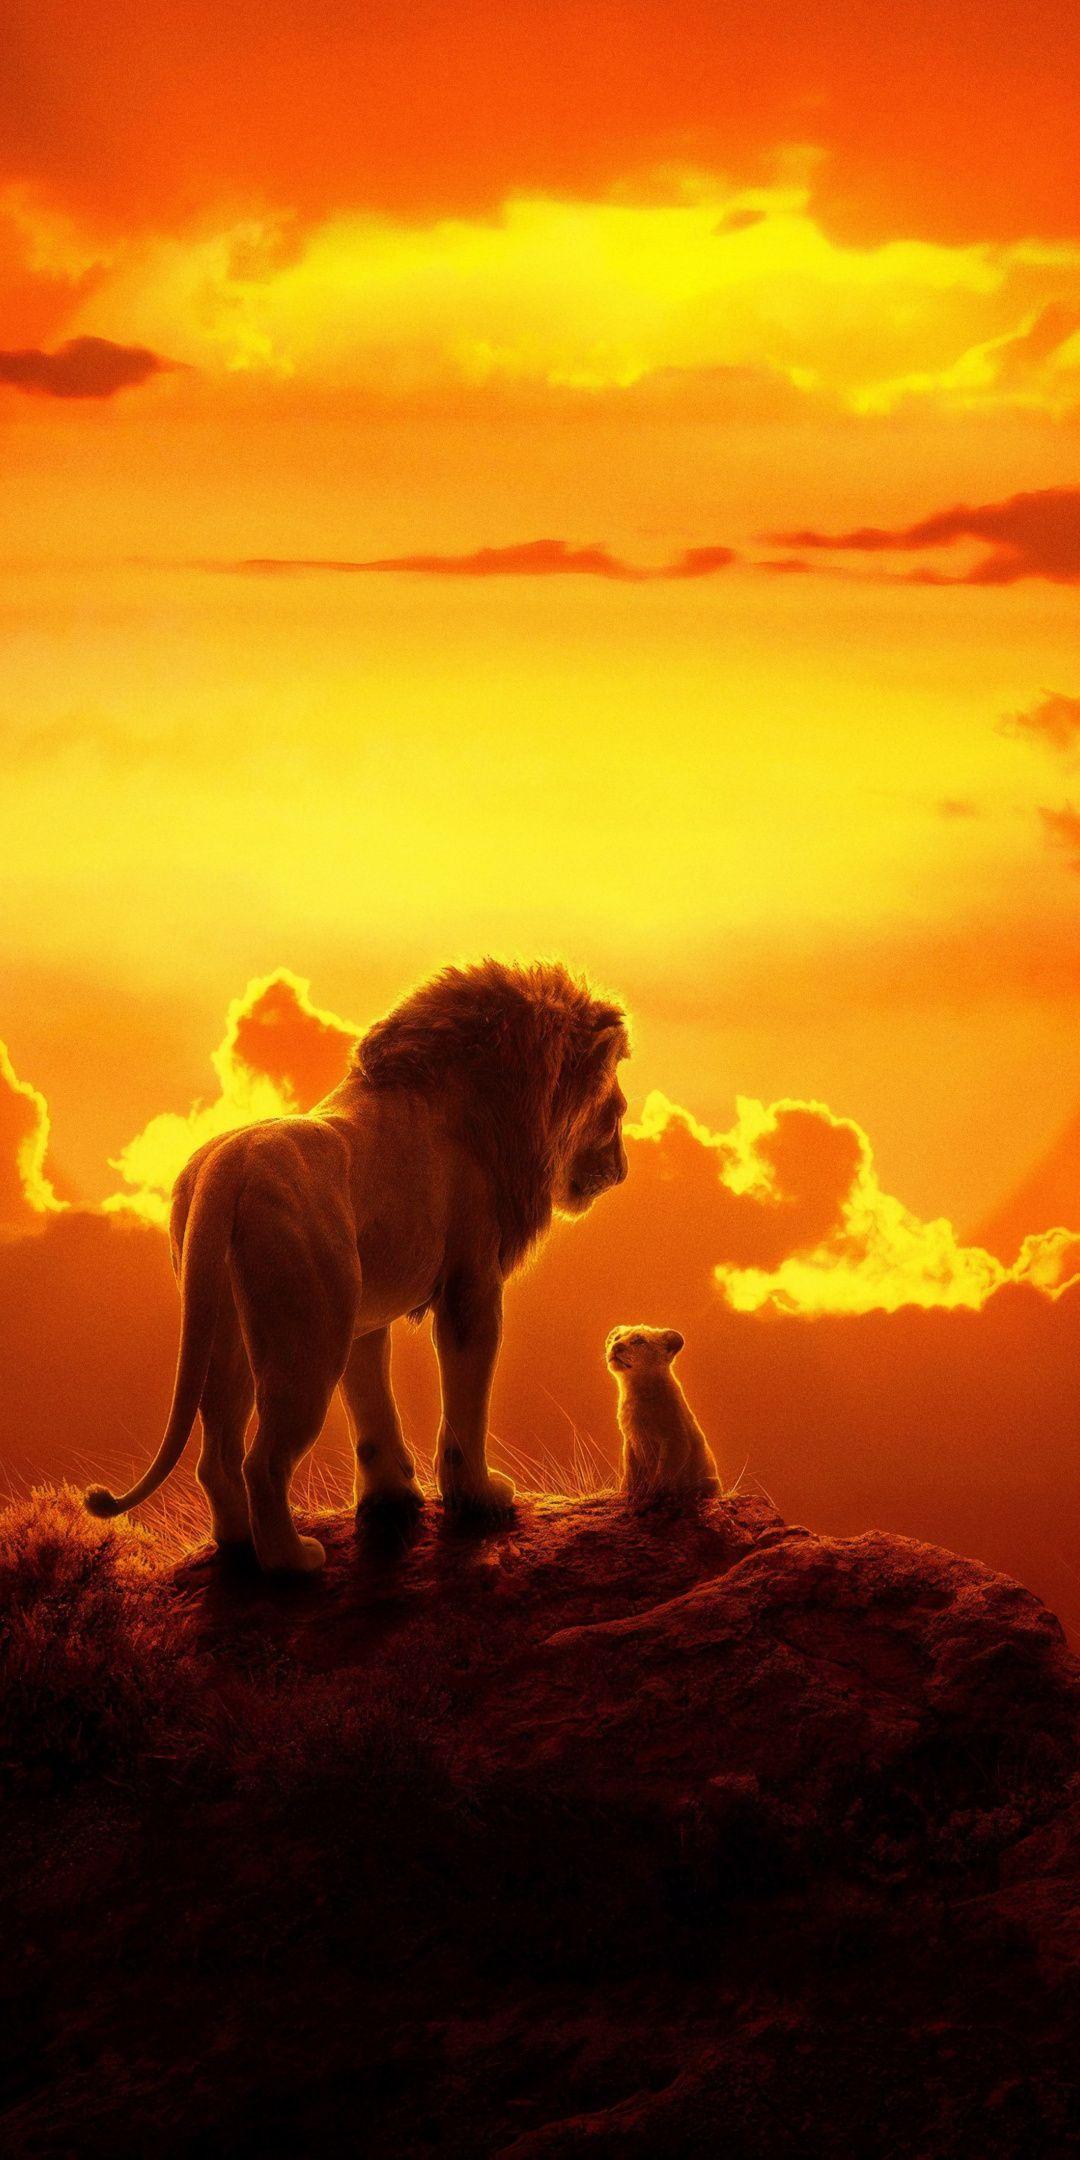 The lion king, lion and cub, 2019 movie, 1080x2160 wallpaper. Movie